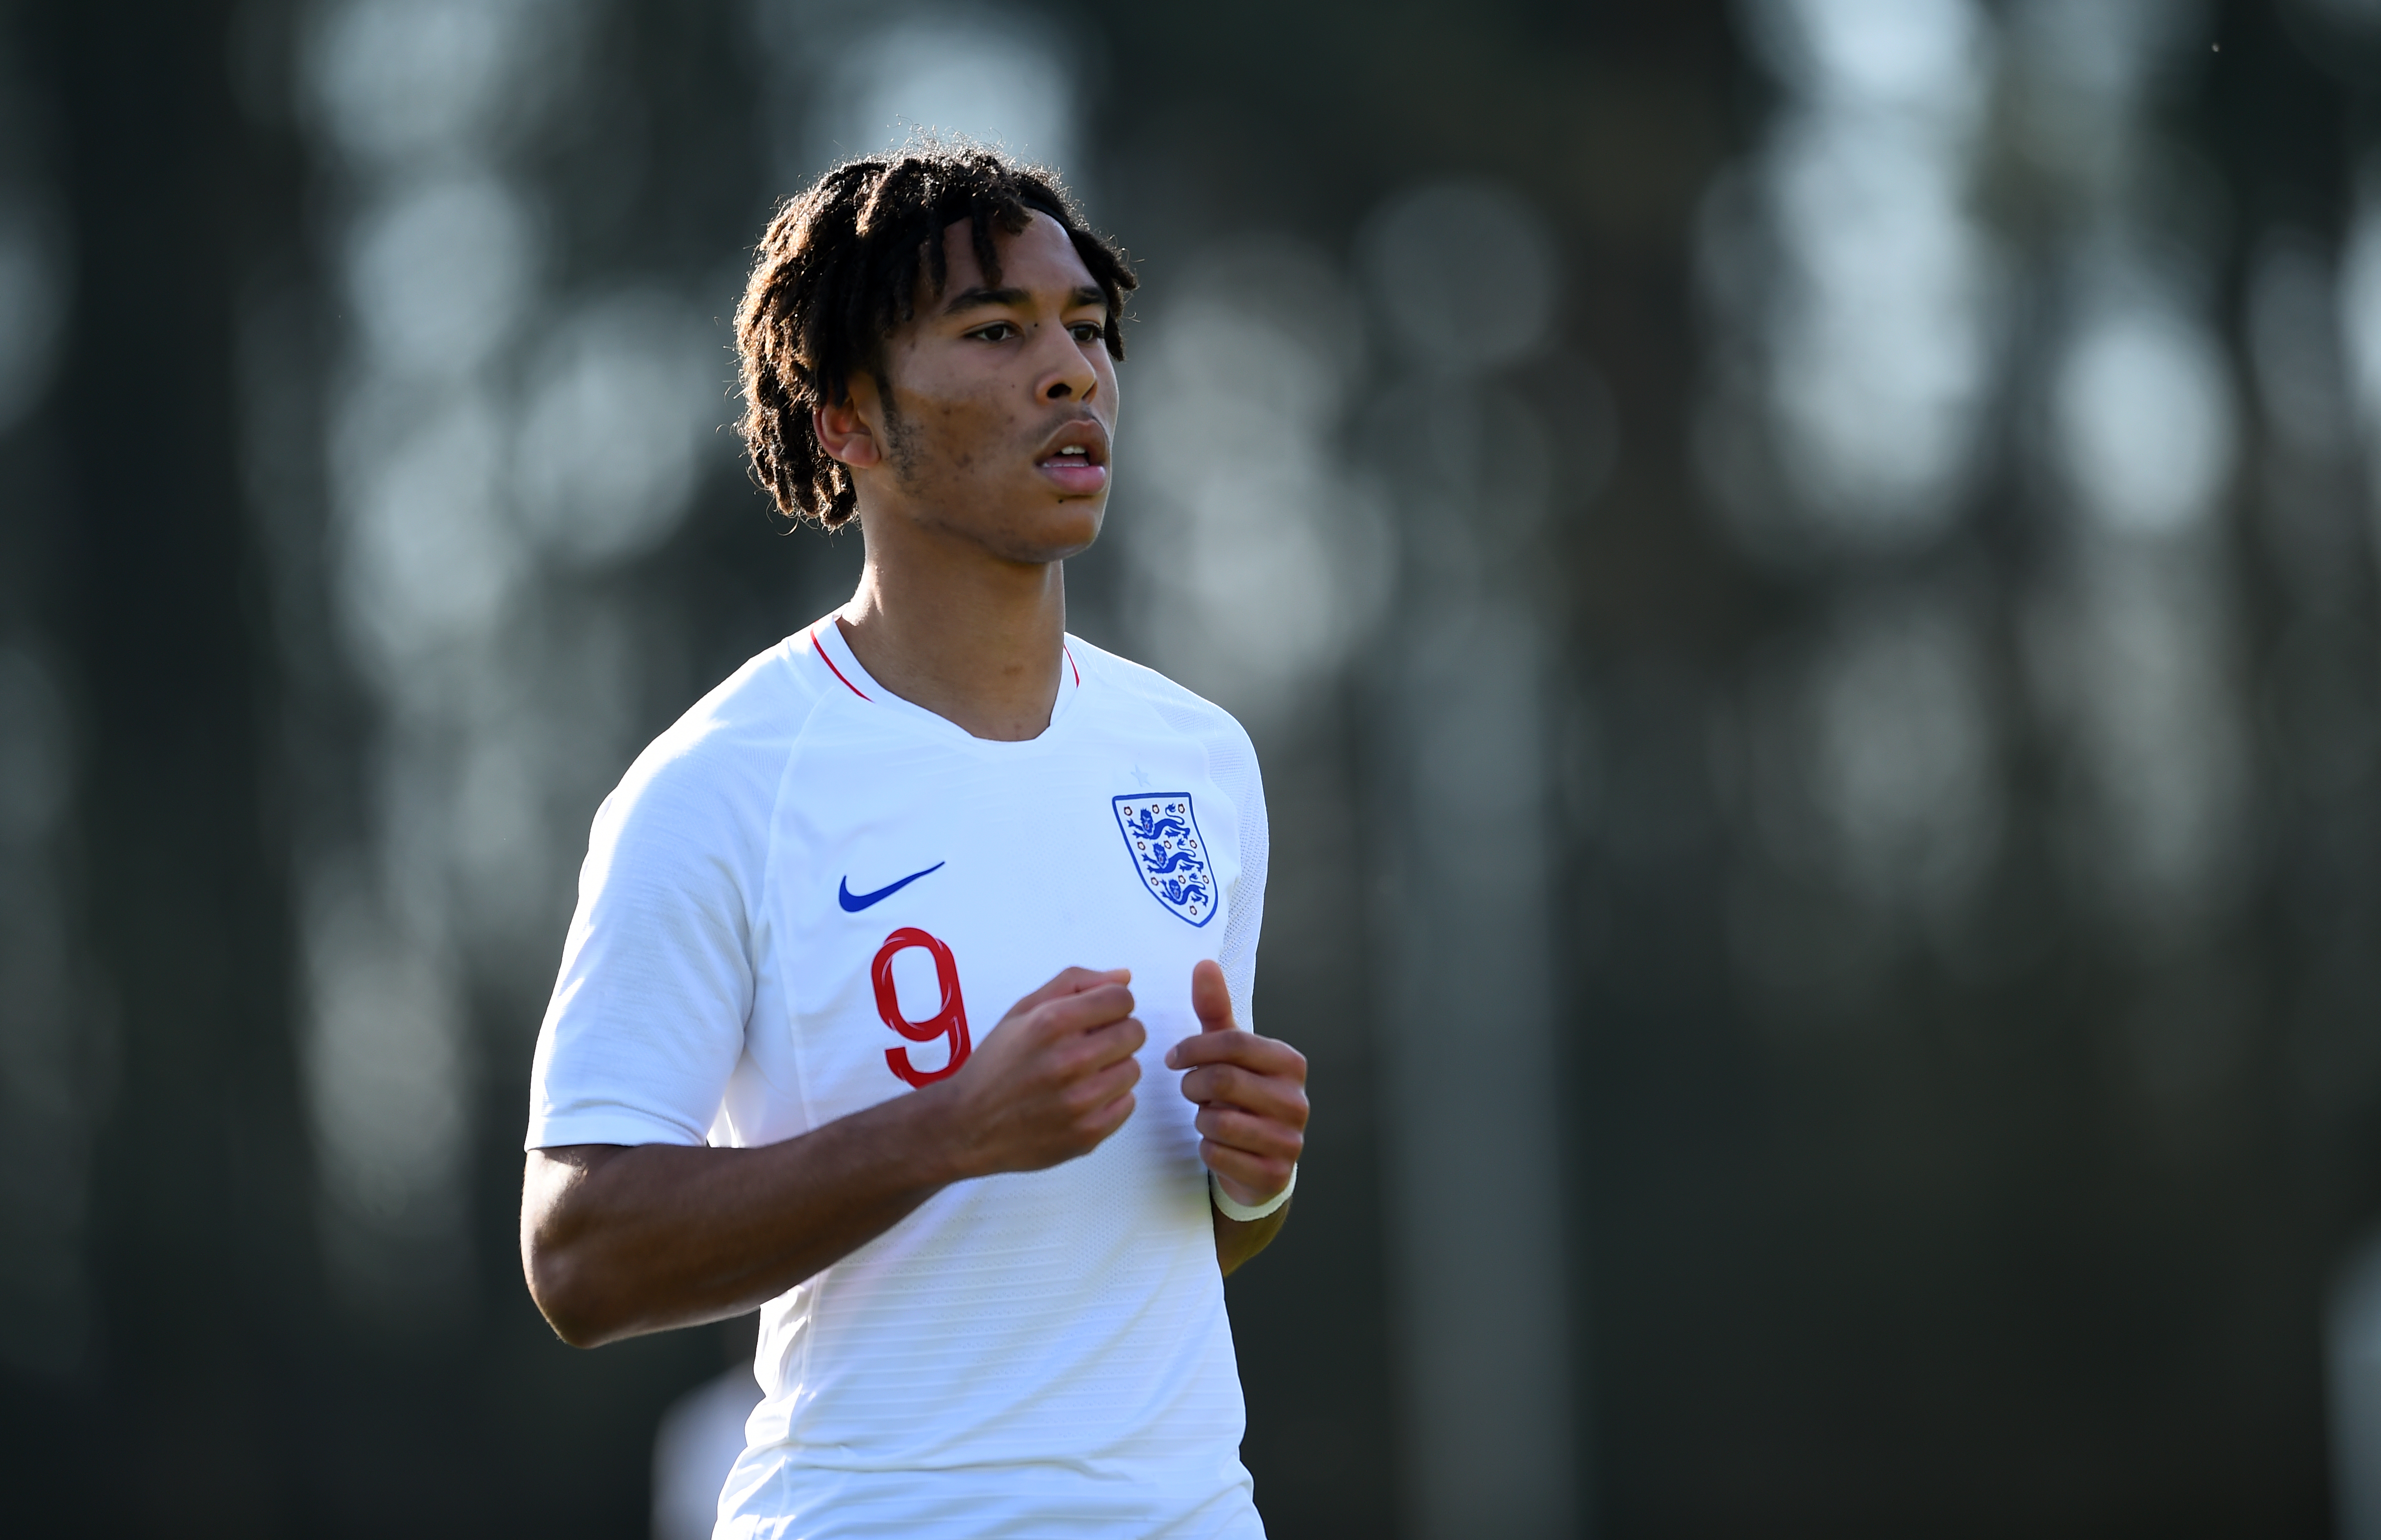 BURTON-UPON-TRENT, ENGLAND - MARCH 20: Danny Loader of England looks on during the UEFA U19 Championship Qualifier match between England U19 and Czech Republic U19 at St Georges Park on March 20, 2019 in Burton-upon-Trent, England. (Photo by Nathan Stirk/Getty Images)